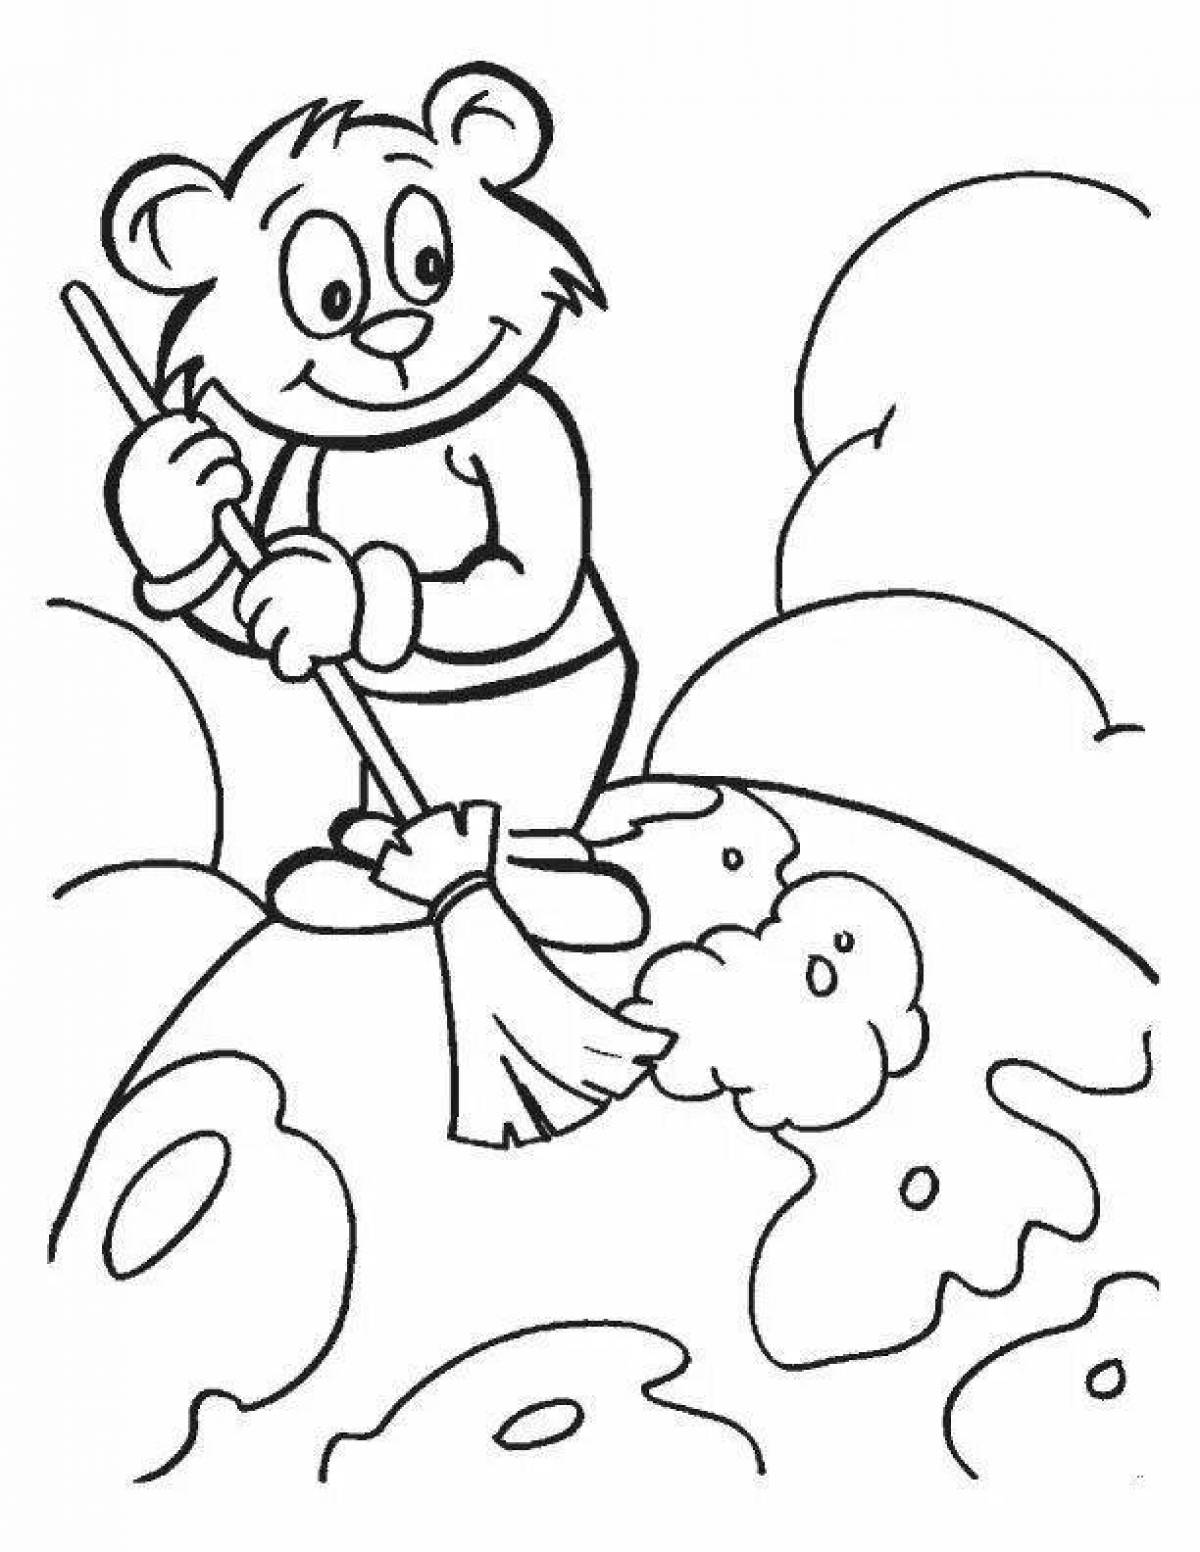 Glowing ecology coloring page